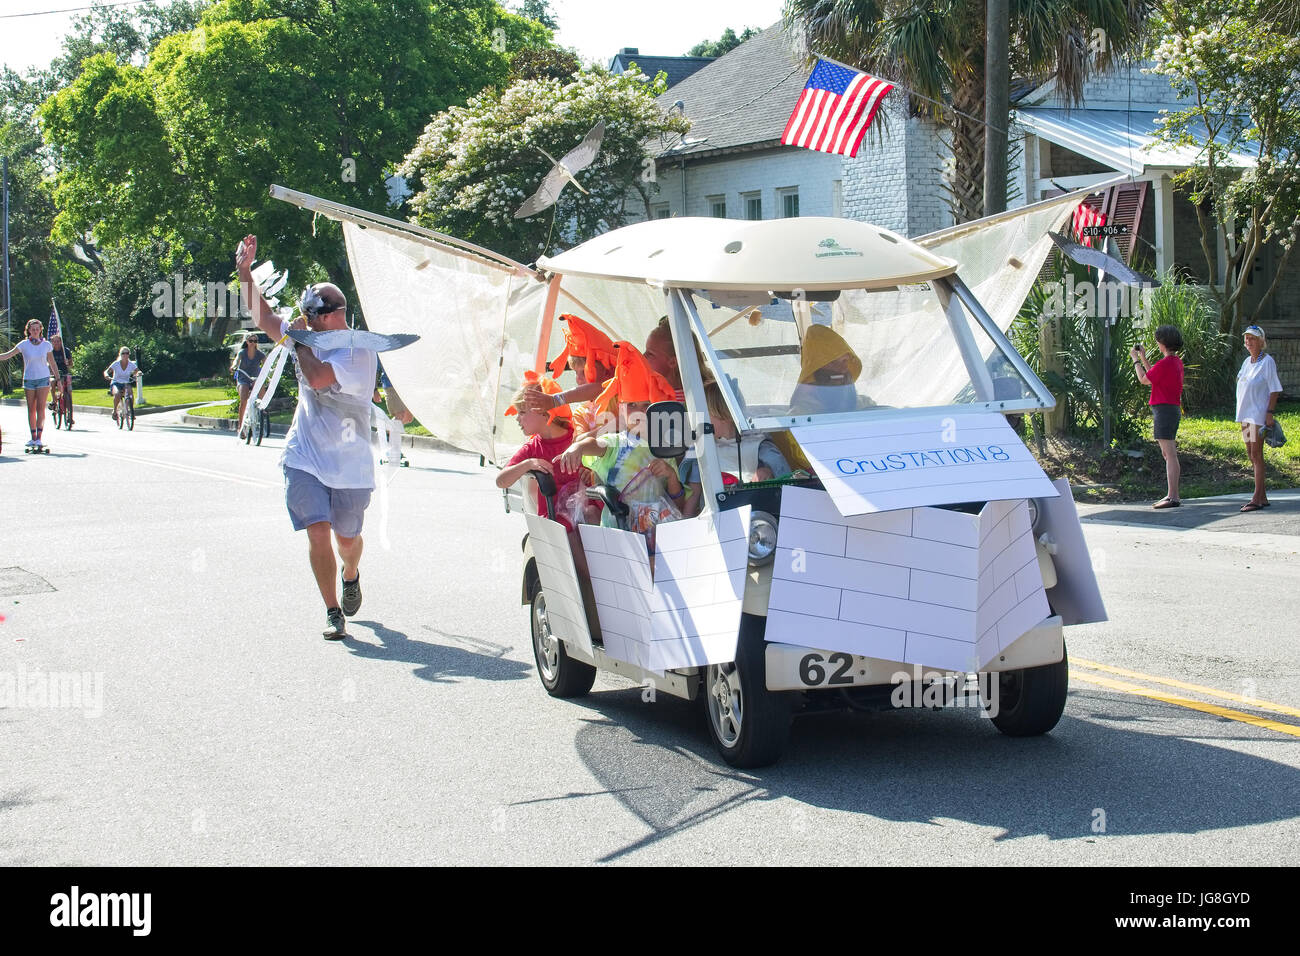 Sullivan's Island, South Carolina, USA. 4th July, 2017. A golf cart decorated as a shrimp boat during the annual Sullivan's Island Independence Day parade July 4, 2017 in Sullivan's Island, South Carolina. The tiny affluent sea island hosts a bicycle and golf cart parade through the historic village. Credit: Planetpix/Alamy Live News Stock Photo